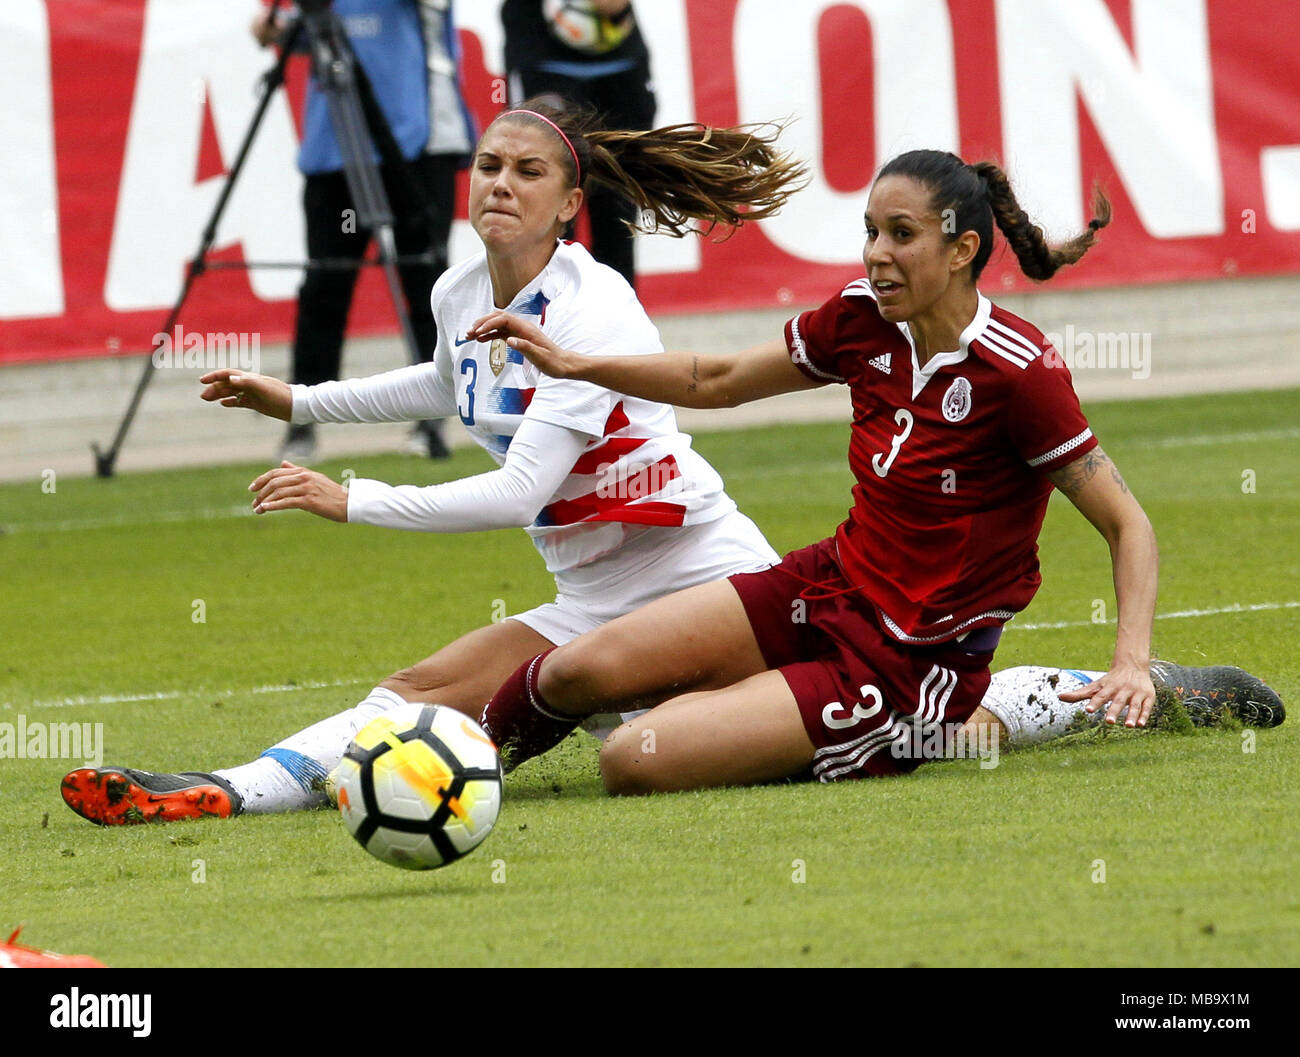 Houston, USA. 8th Apr, 2018. Bianca Sierra (R) of Mexico competes with Alex Morgan of the United States during an international friendly football match between the United States and Mexico in Houston, the United States, on April 8, 2018. Credit: Song Qiong/Xinhua/Alamy Live News Stock Photo